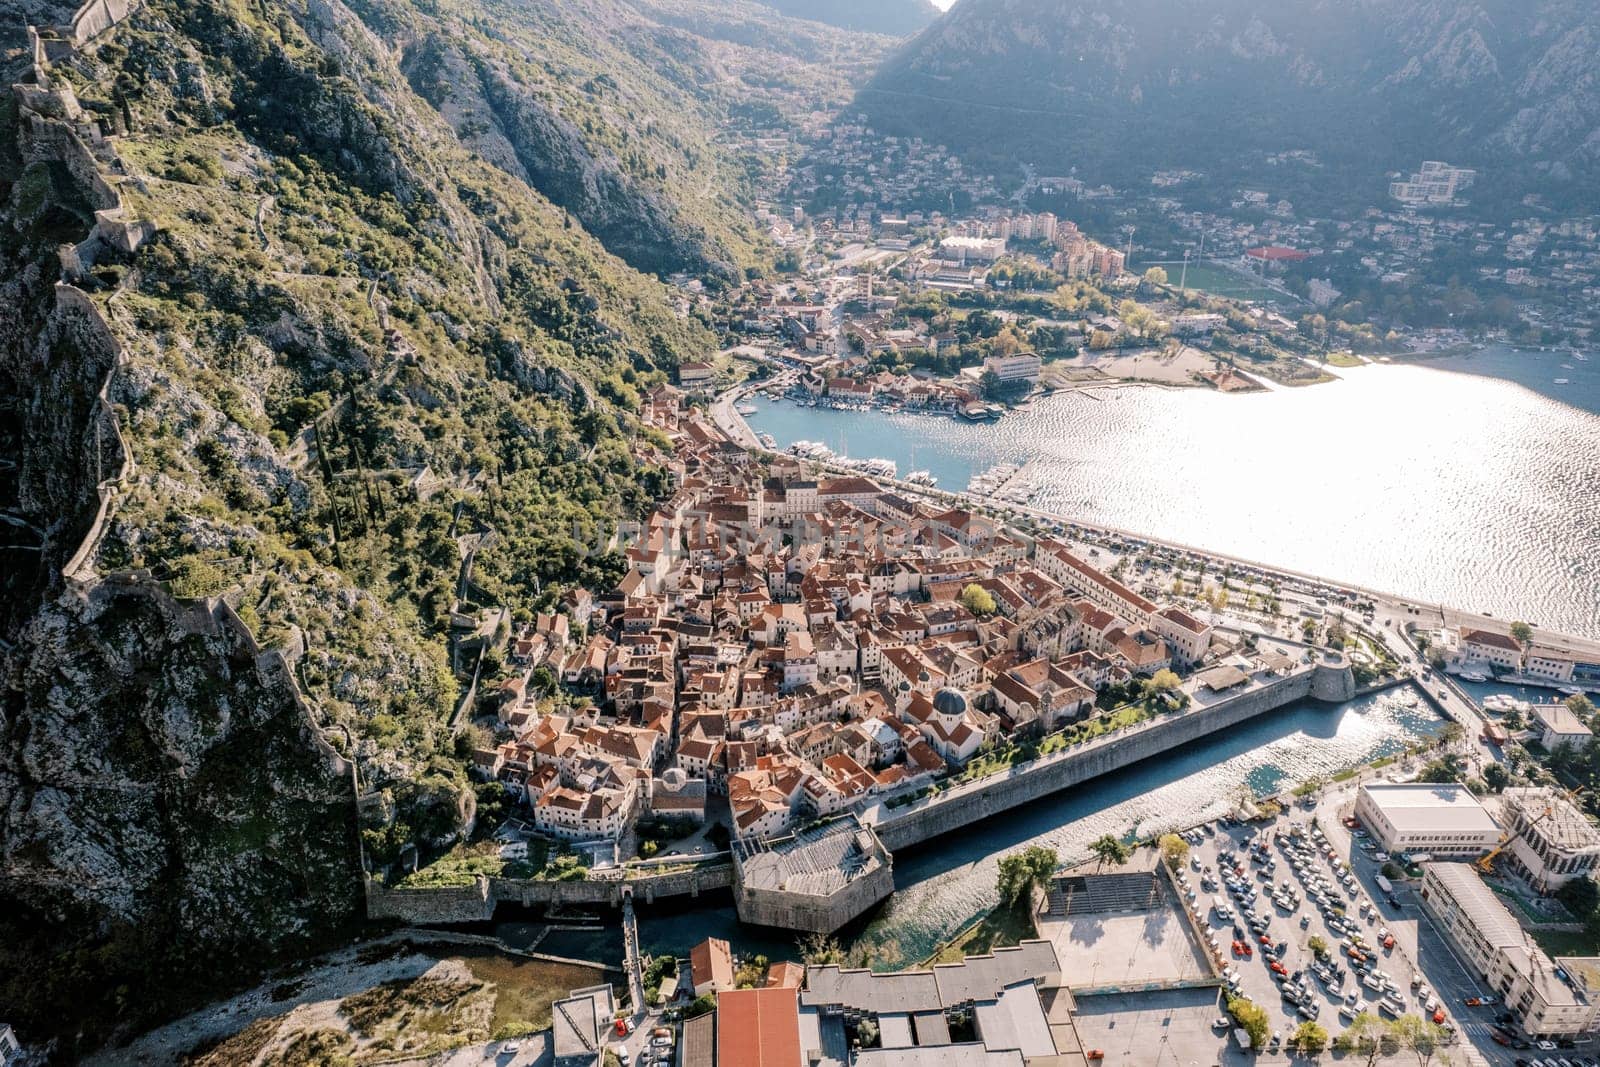 Stone fortress walls of a resort town on the banks of a canal. Kotor, Montenegro by Nadtochiy